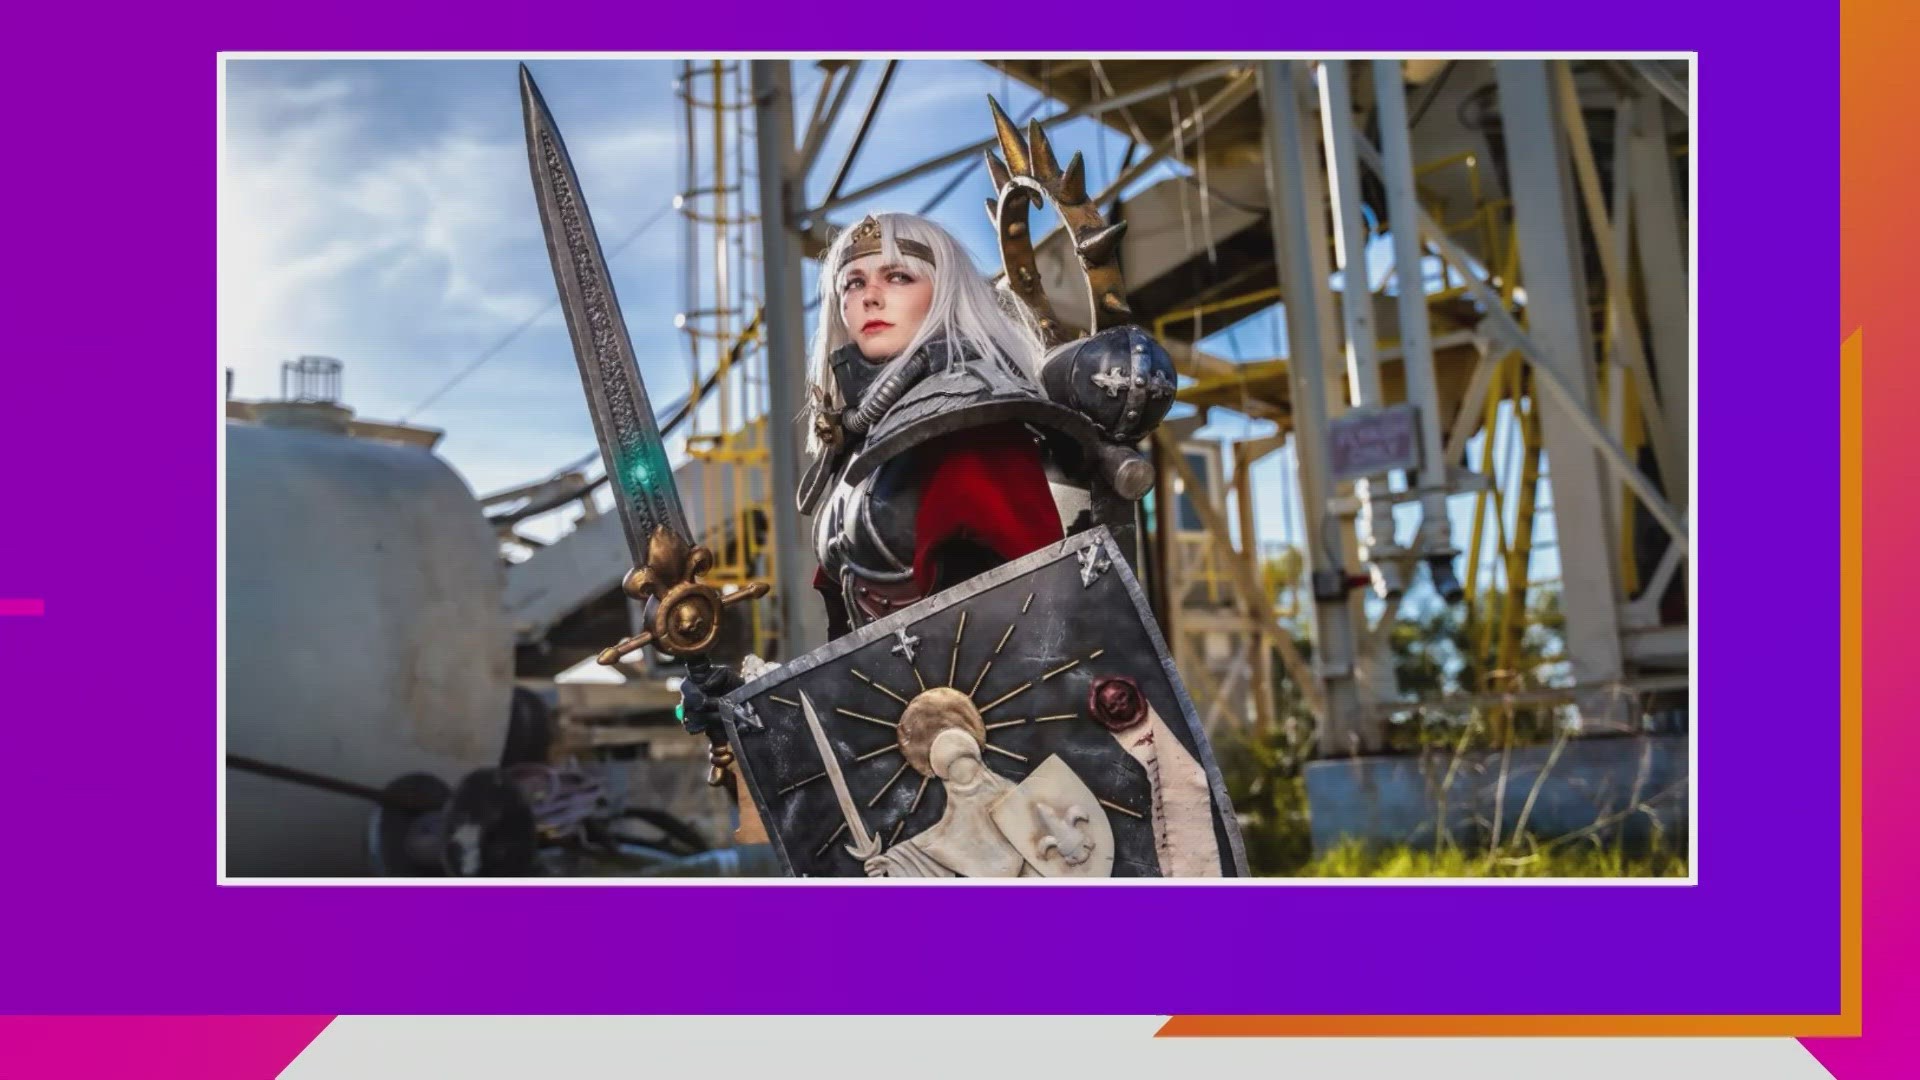 Cosplay experts, Sparrowhawk Cosplay & Michelle Glennon, explain what cosplay is and how you can begin your journey as a cosplayer.